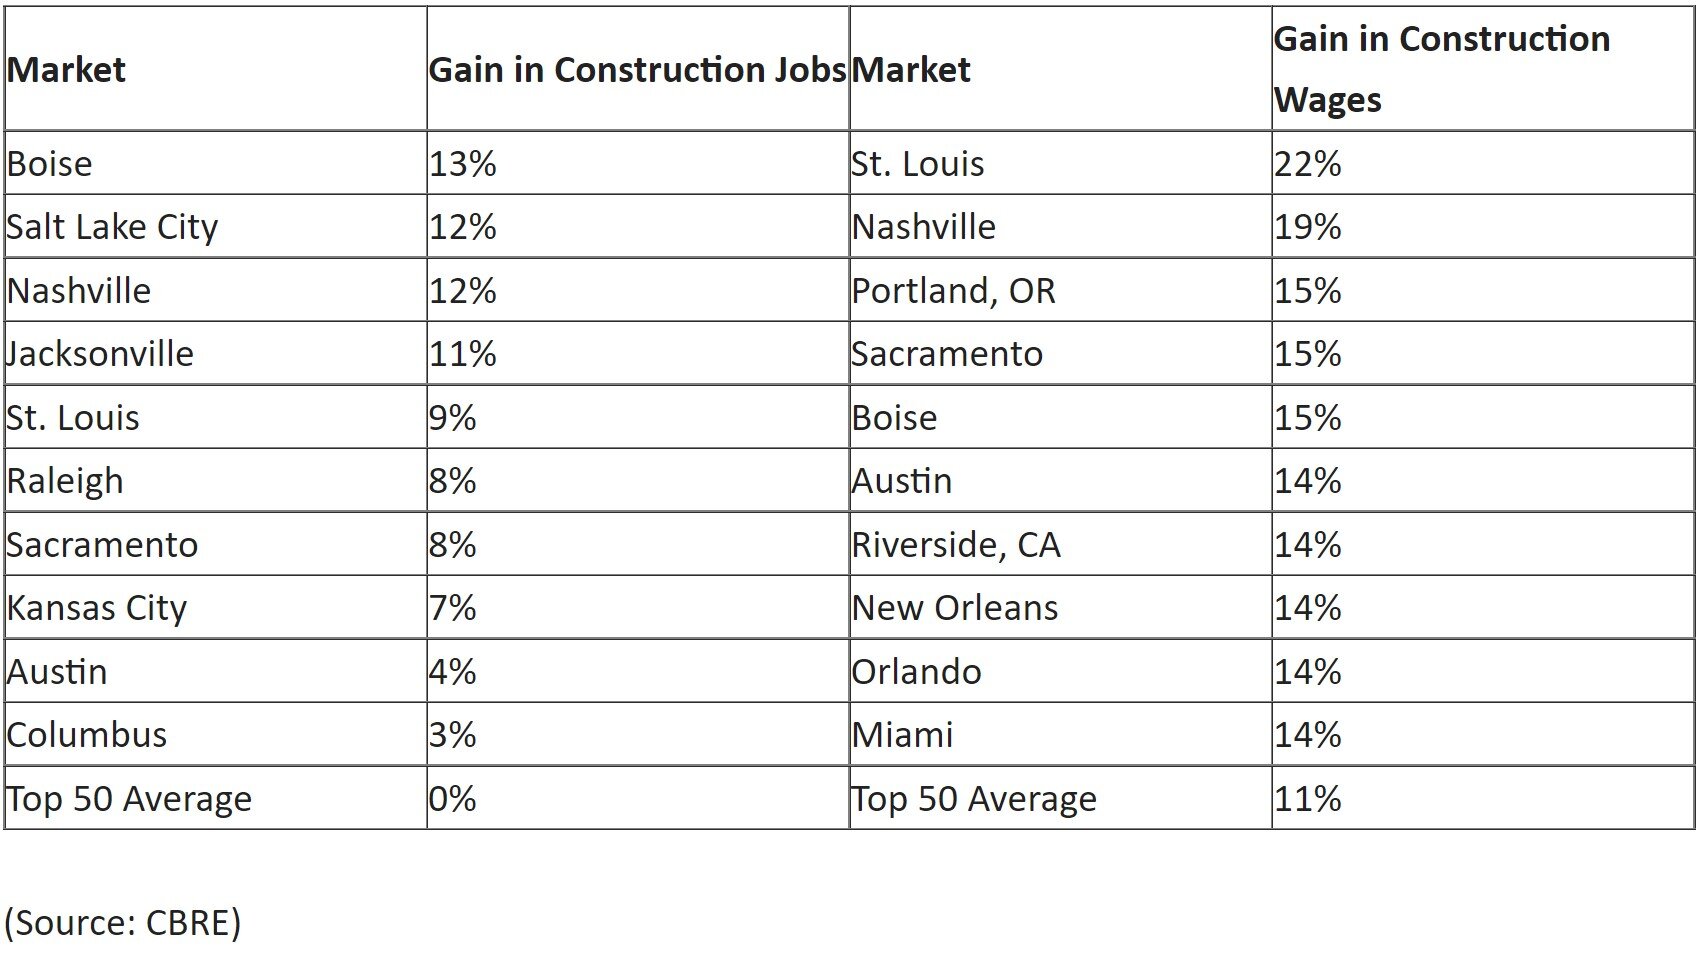 Top 10 US Markets For Gains in Construction Jobs and Wages.jpg